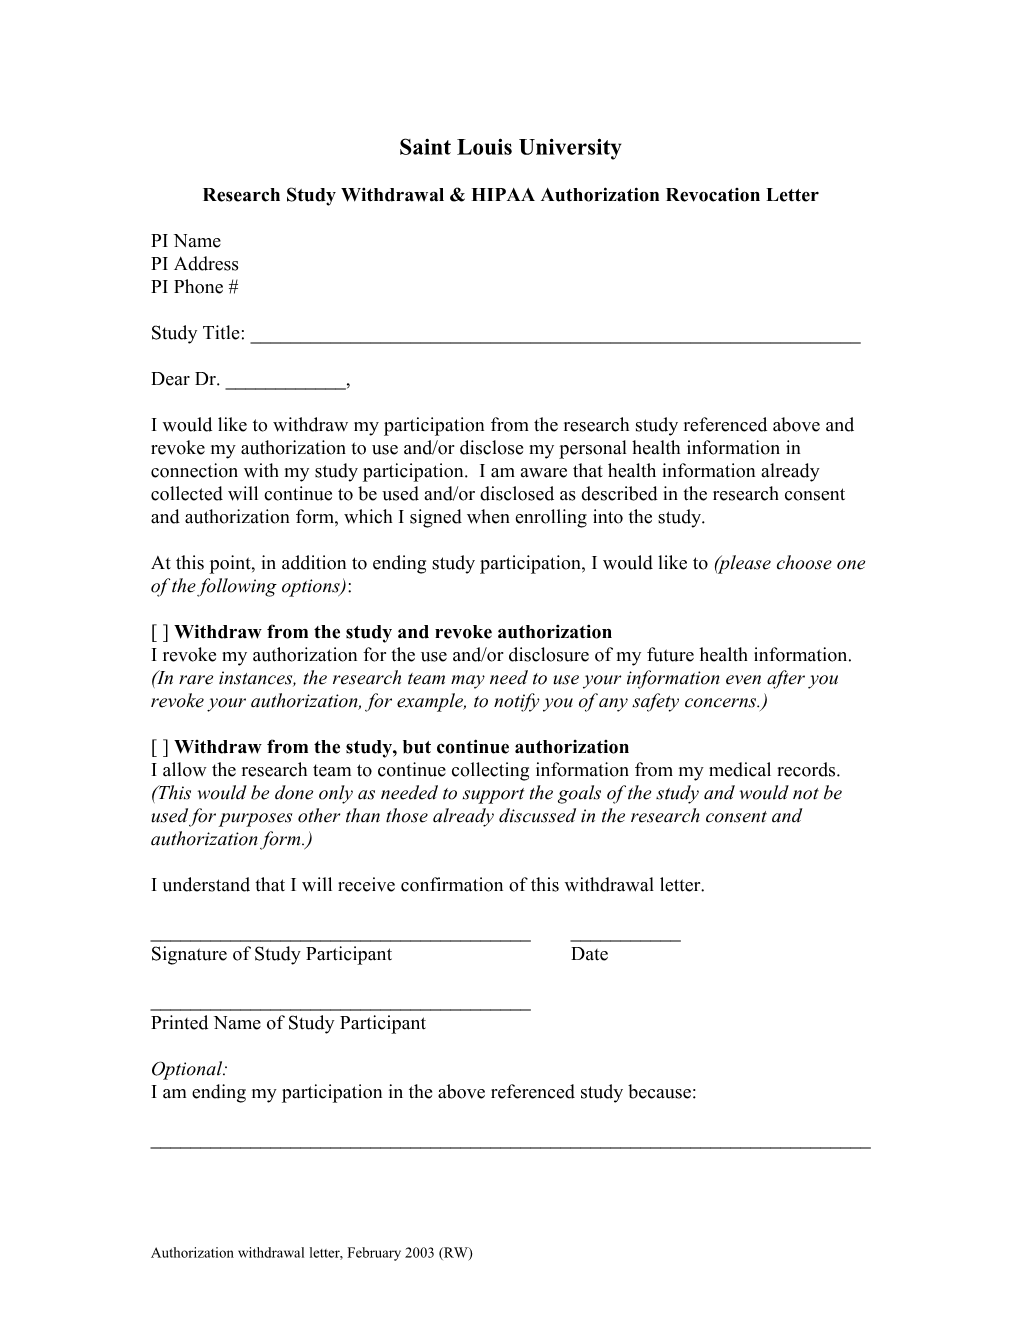 Authorization Withdrawal Letter